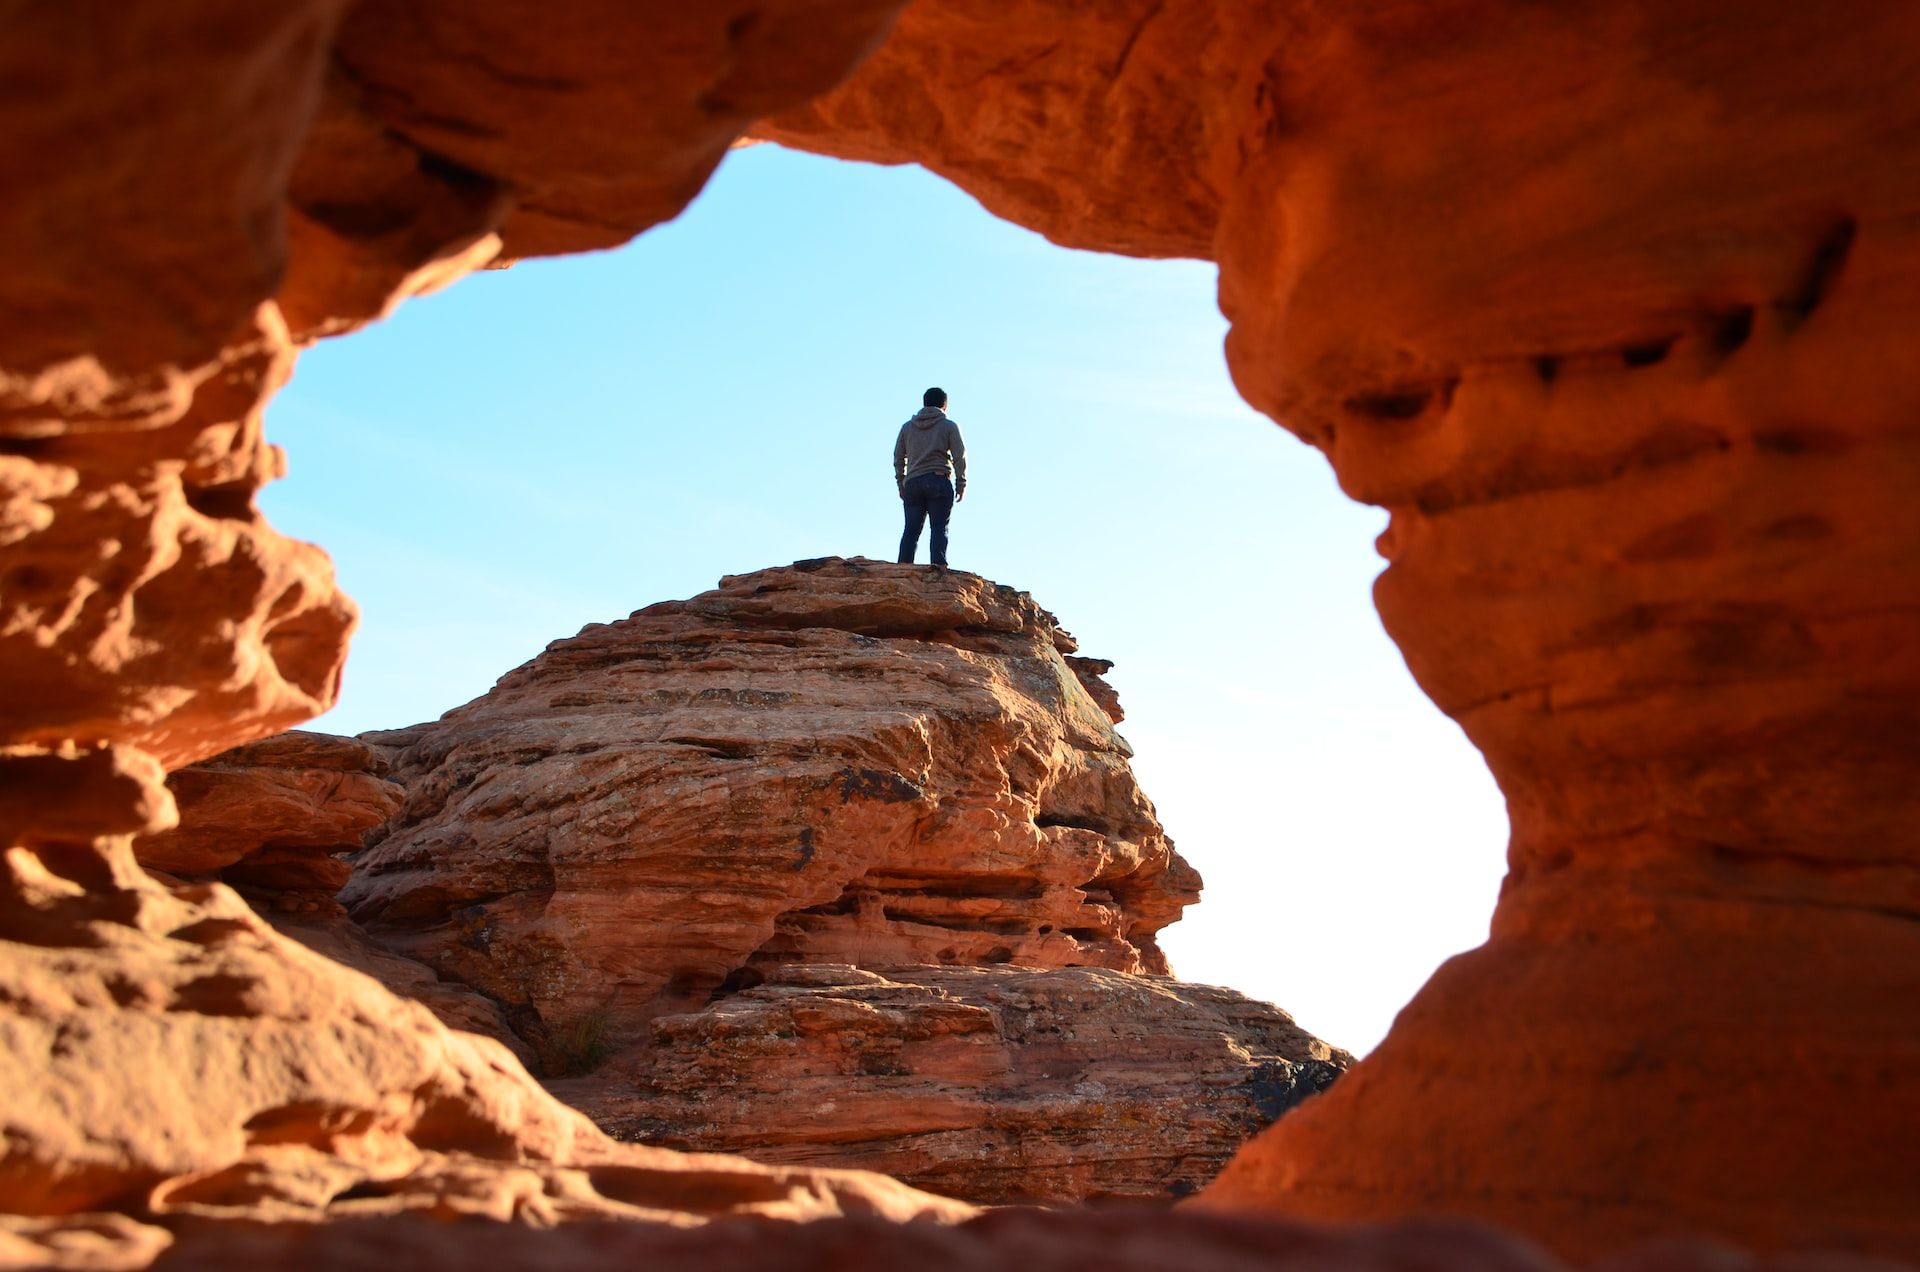 Man standing on a rock in a state park in St. George, Utah